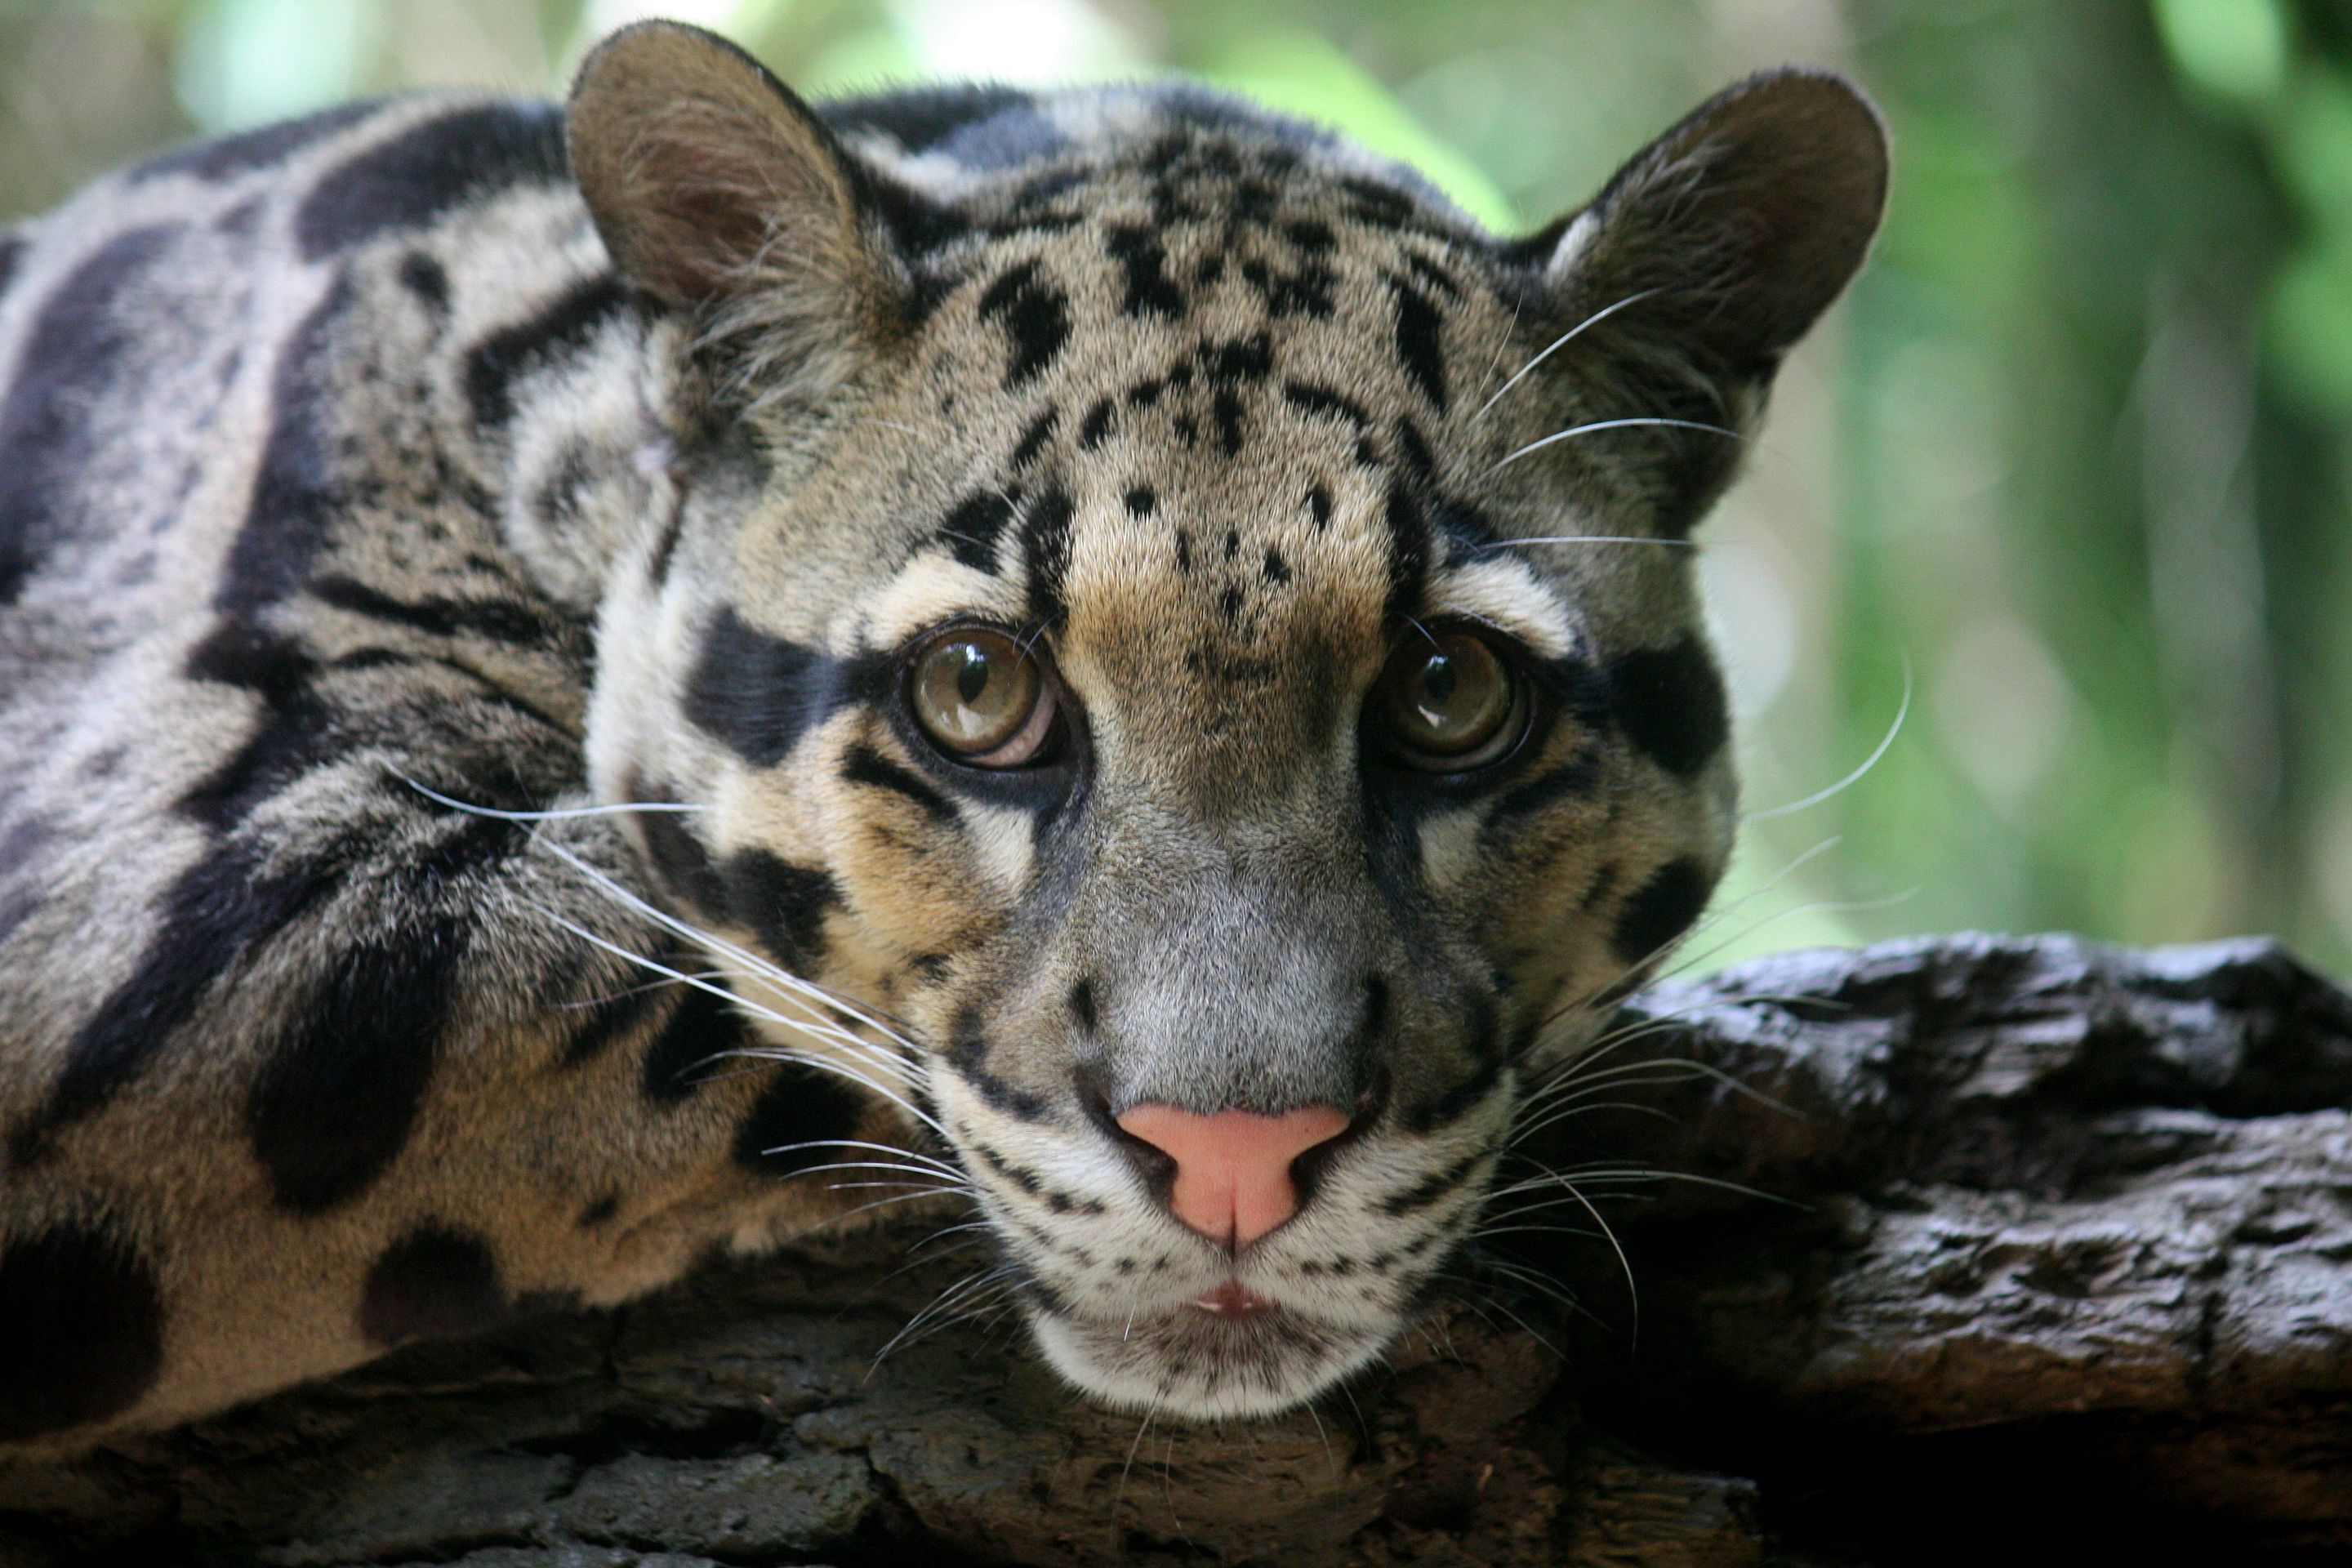 Species of the Week: Formosan clouded leopard | One Earth